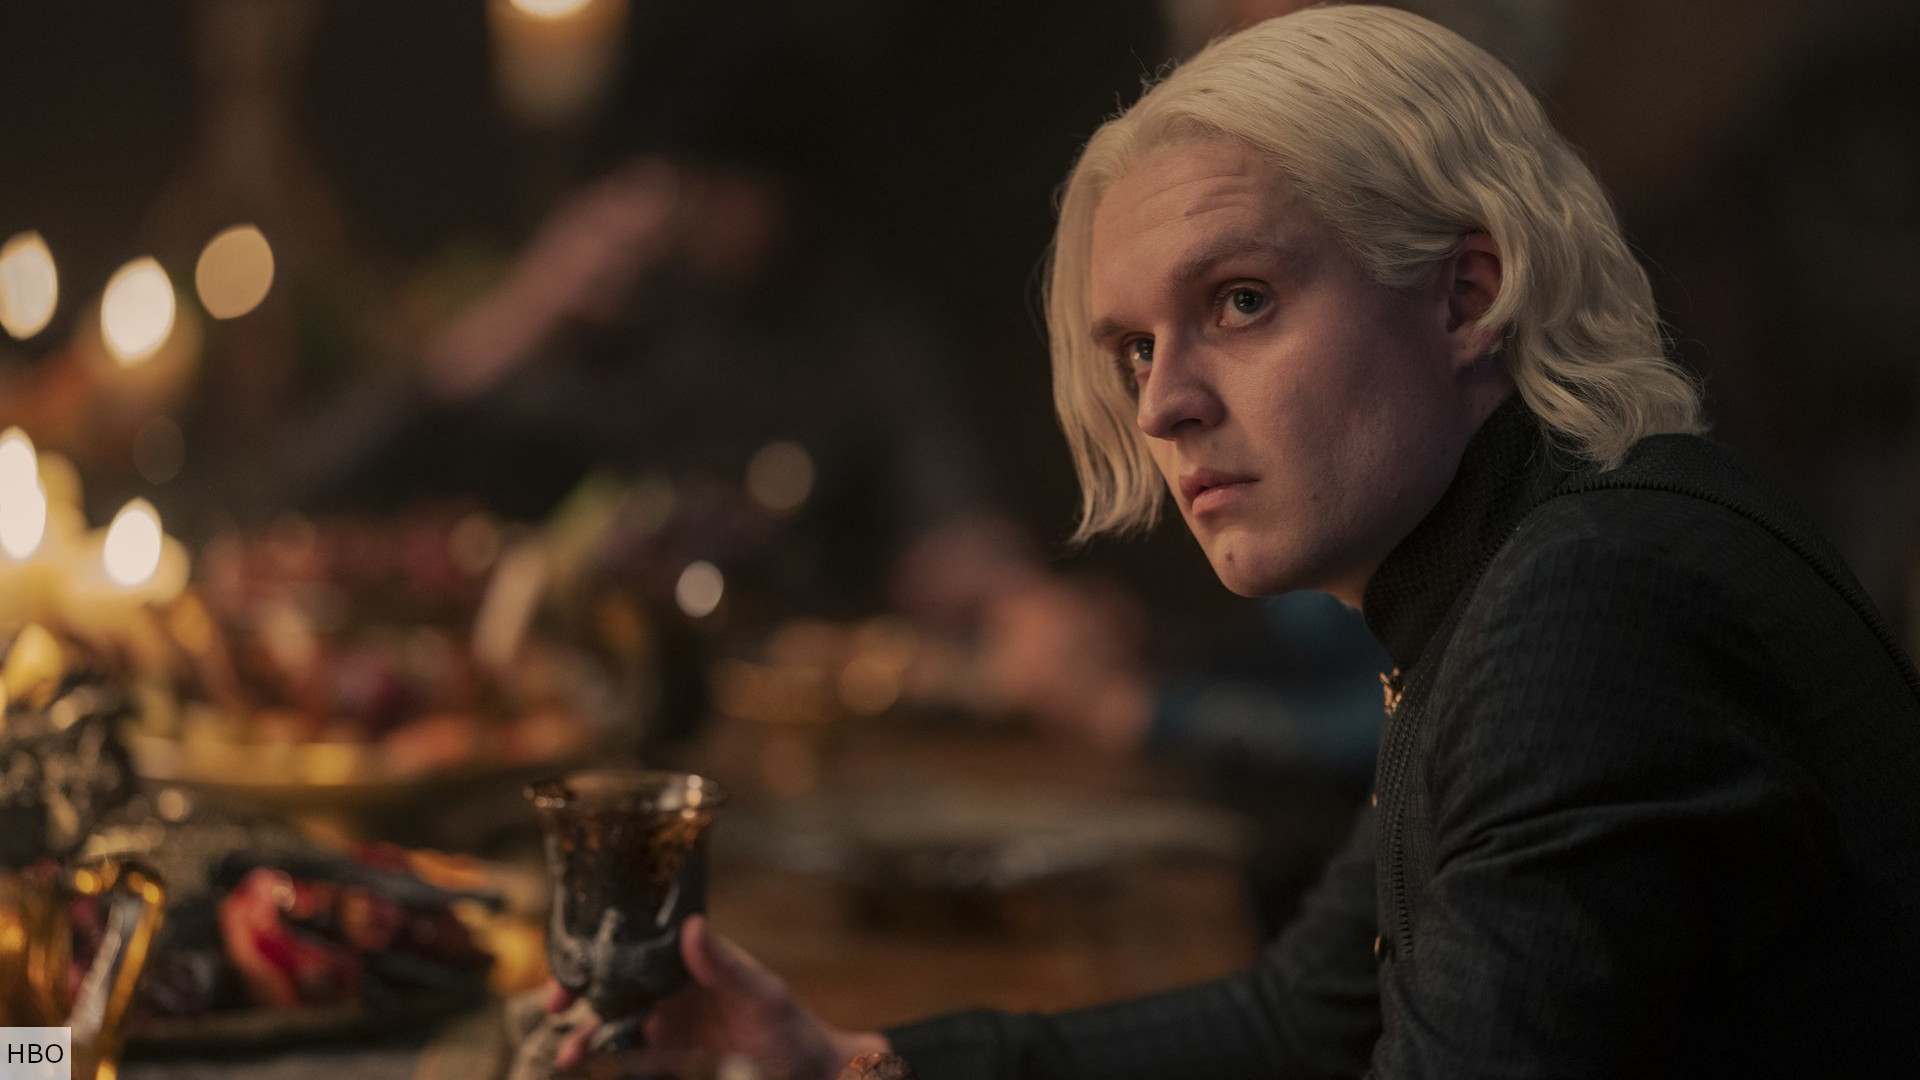 Discovering The Lost Prince: Aegon Targaryen's Journey To Claim His Rightful Throne